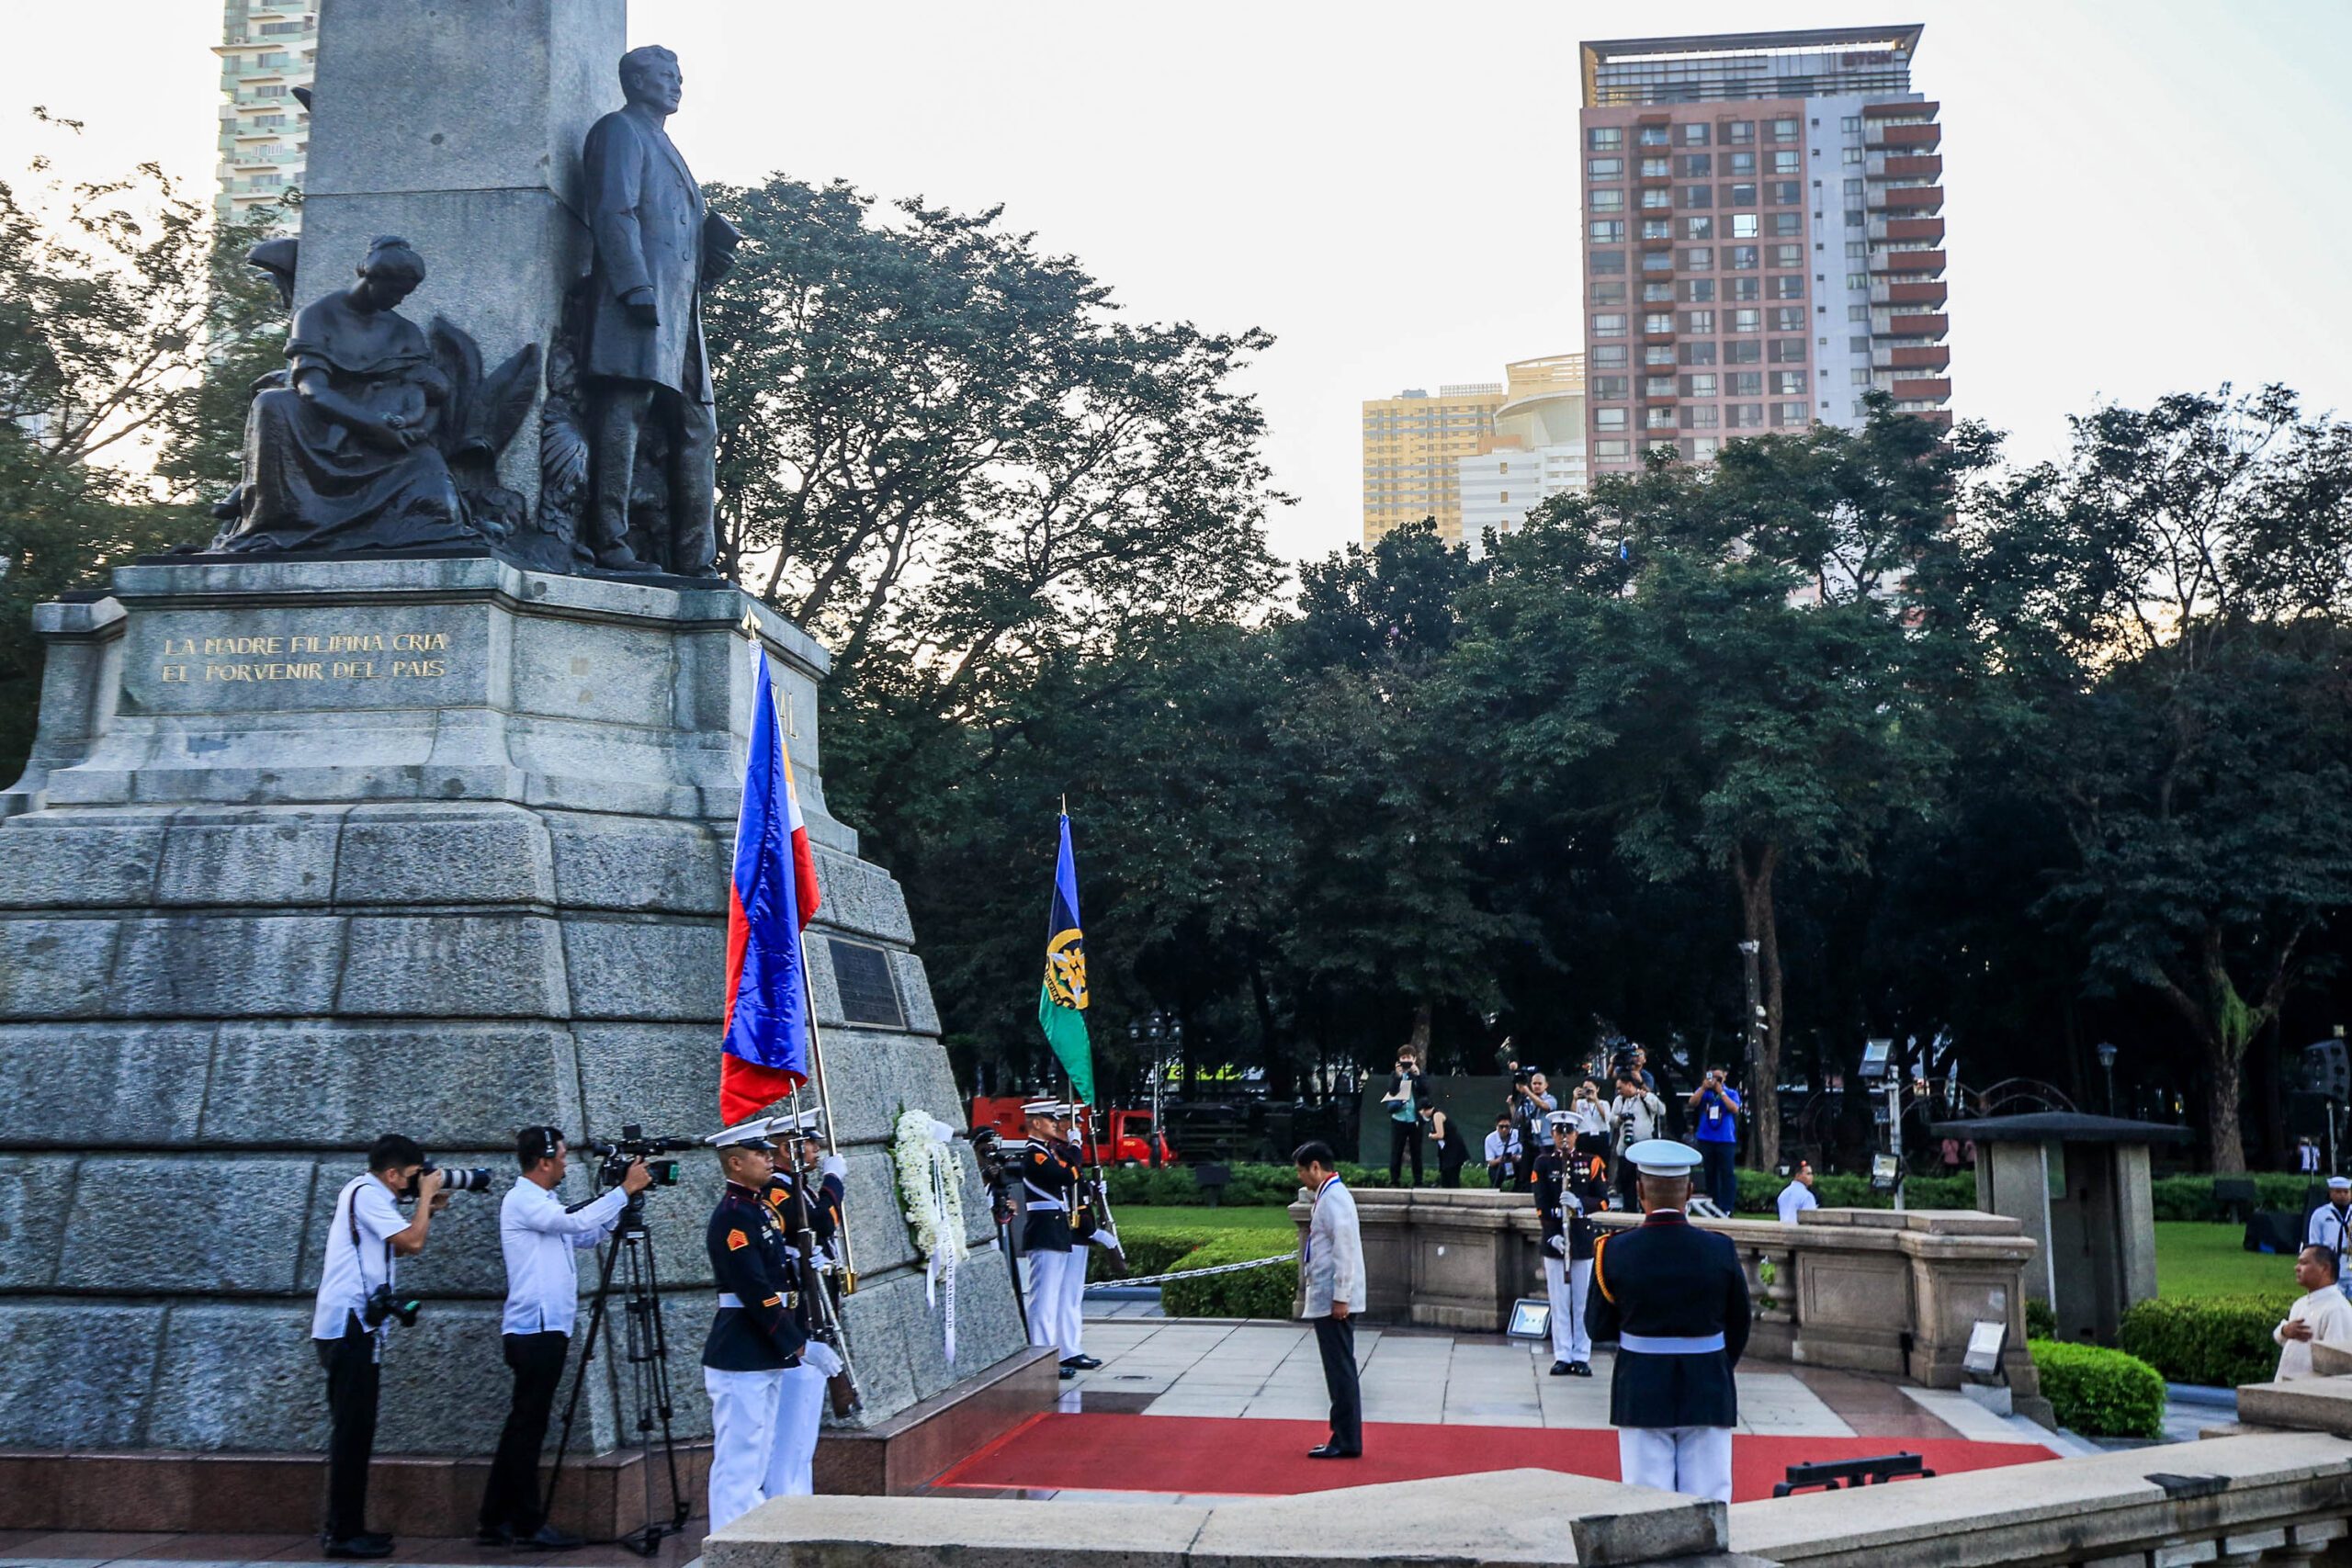 On Rizal Day, Marcos calls on Filipinos ‘to keep emulating’ hero’s values